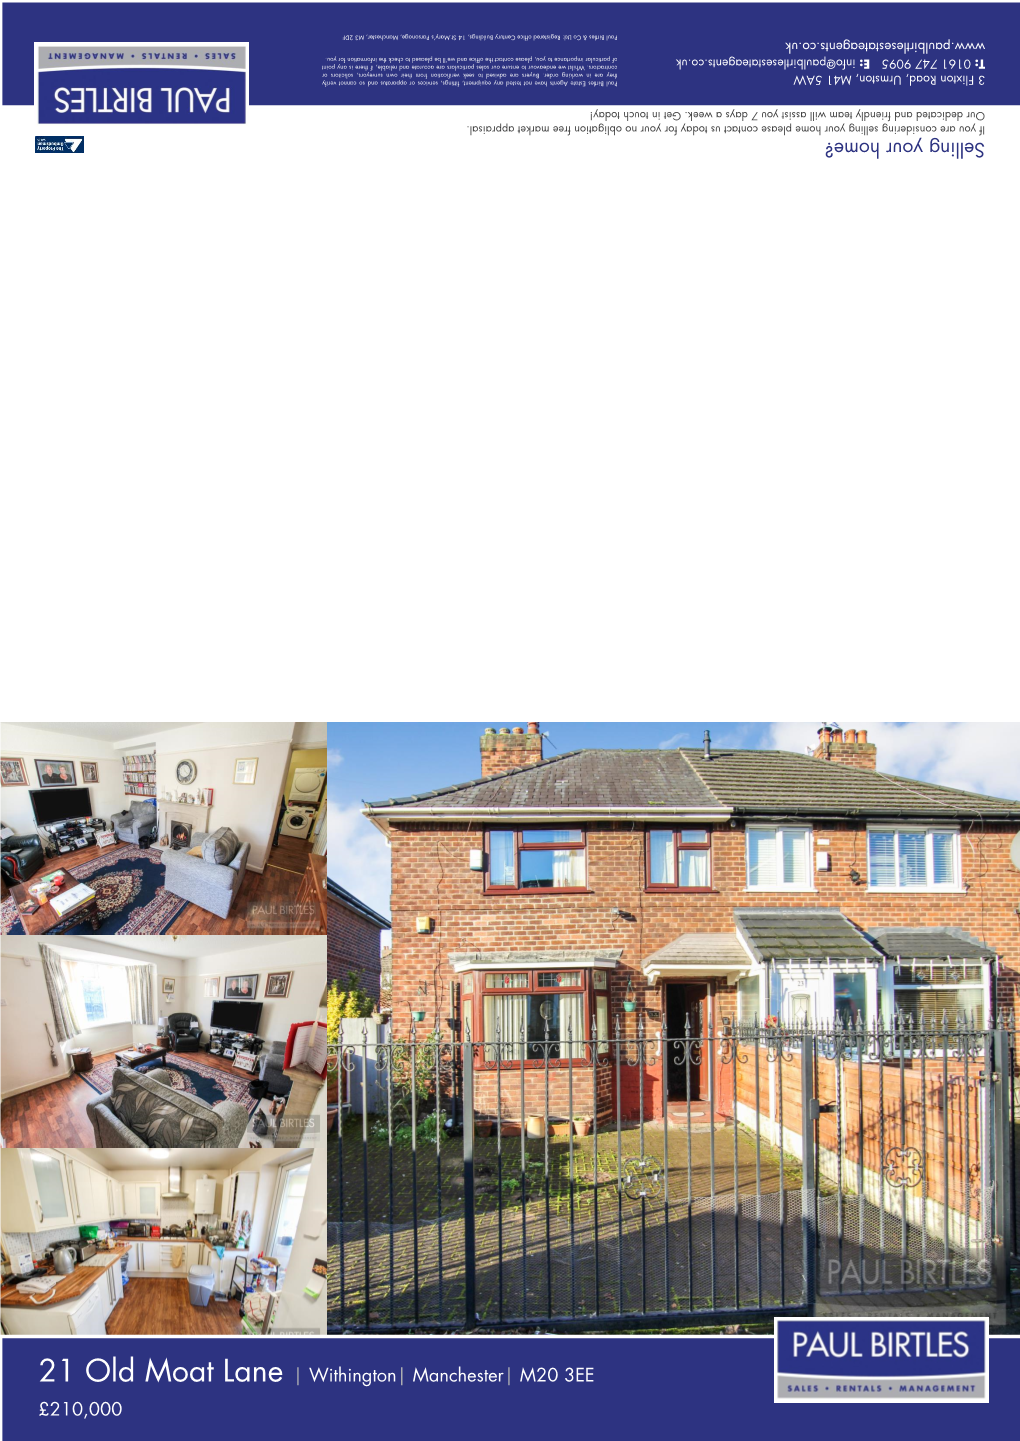 21 Old Moat Lane | Withington| Manchester| M20 3EE £210,000